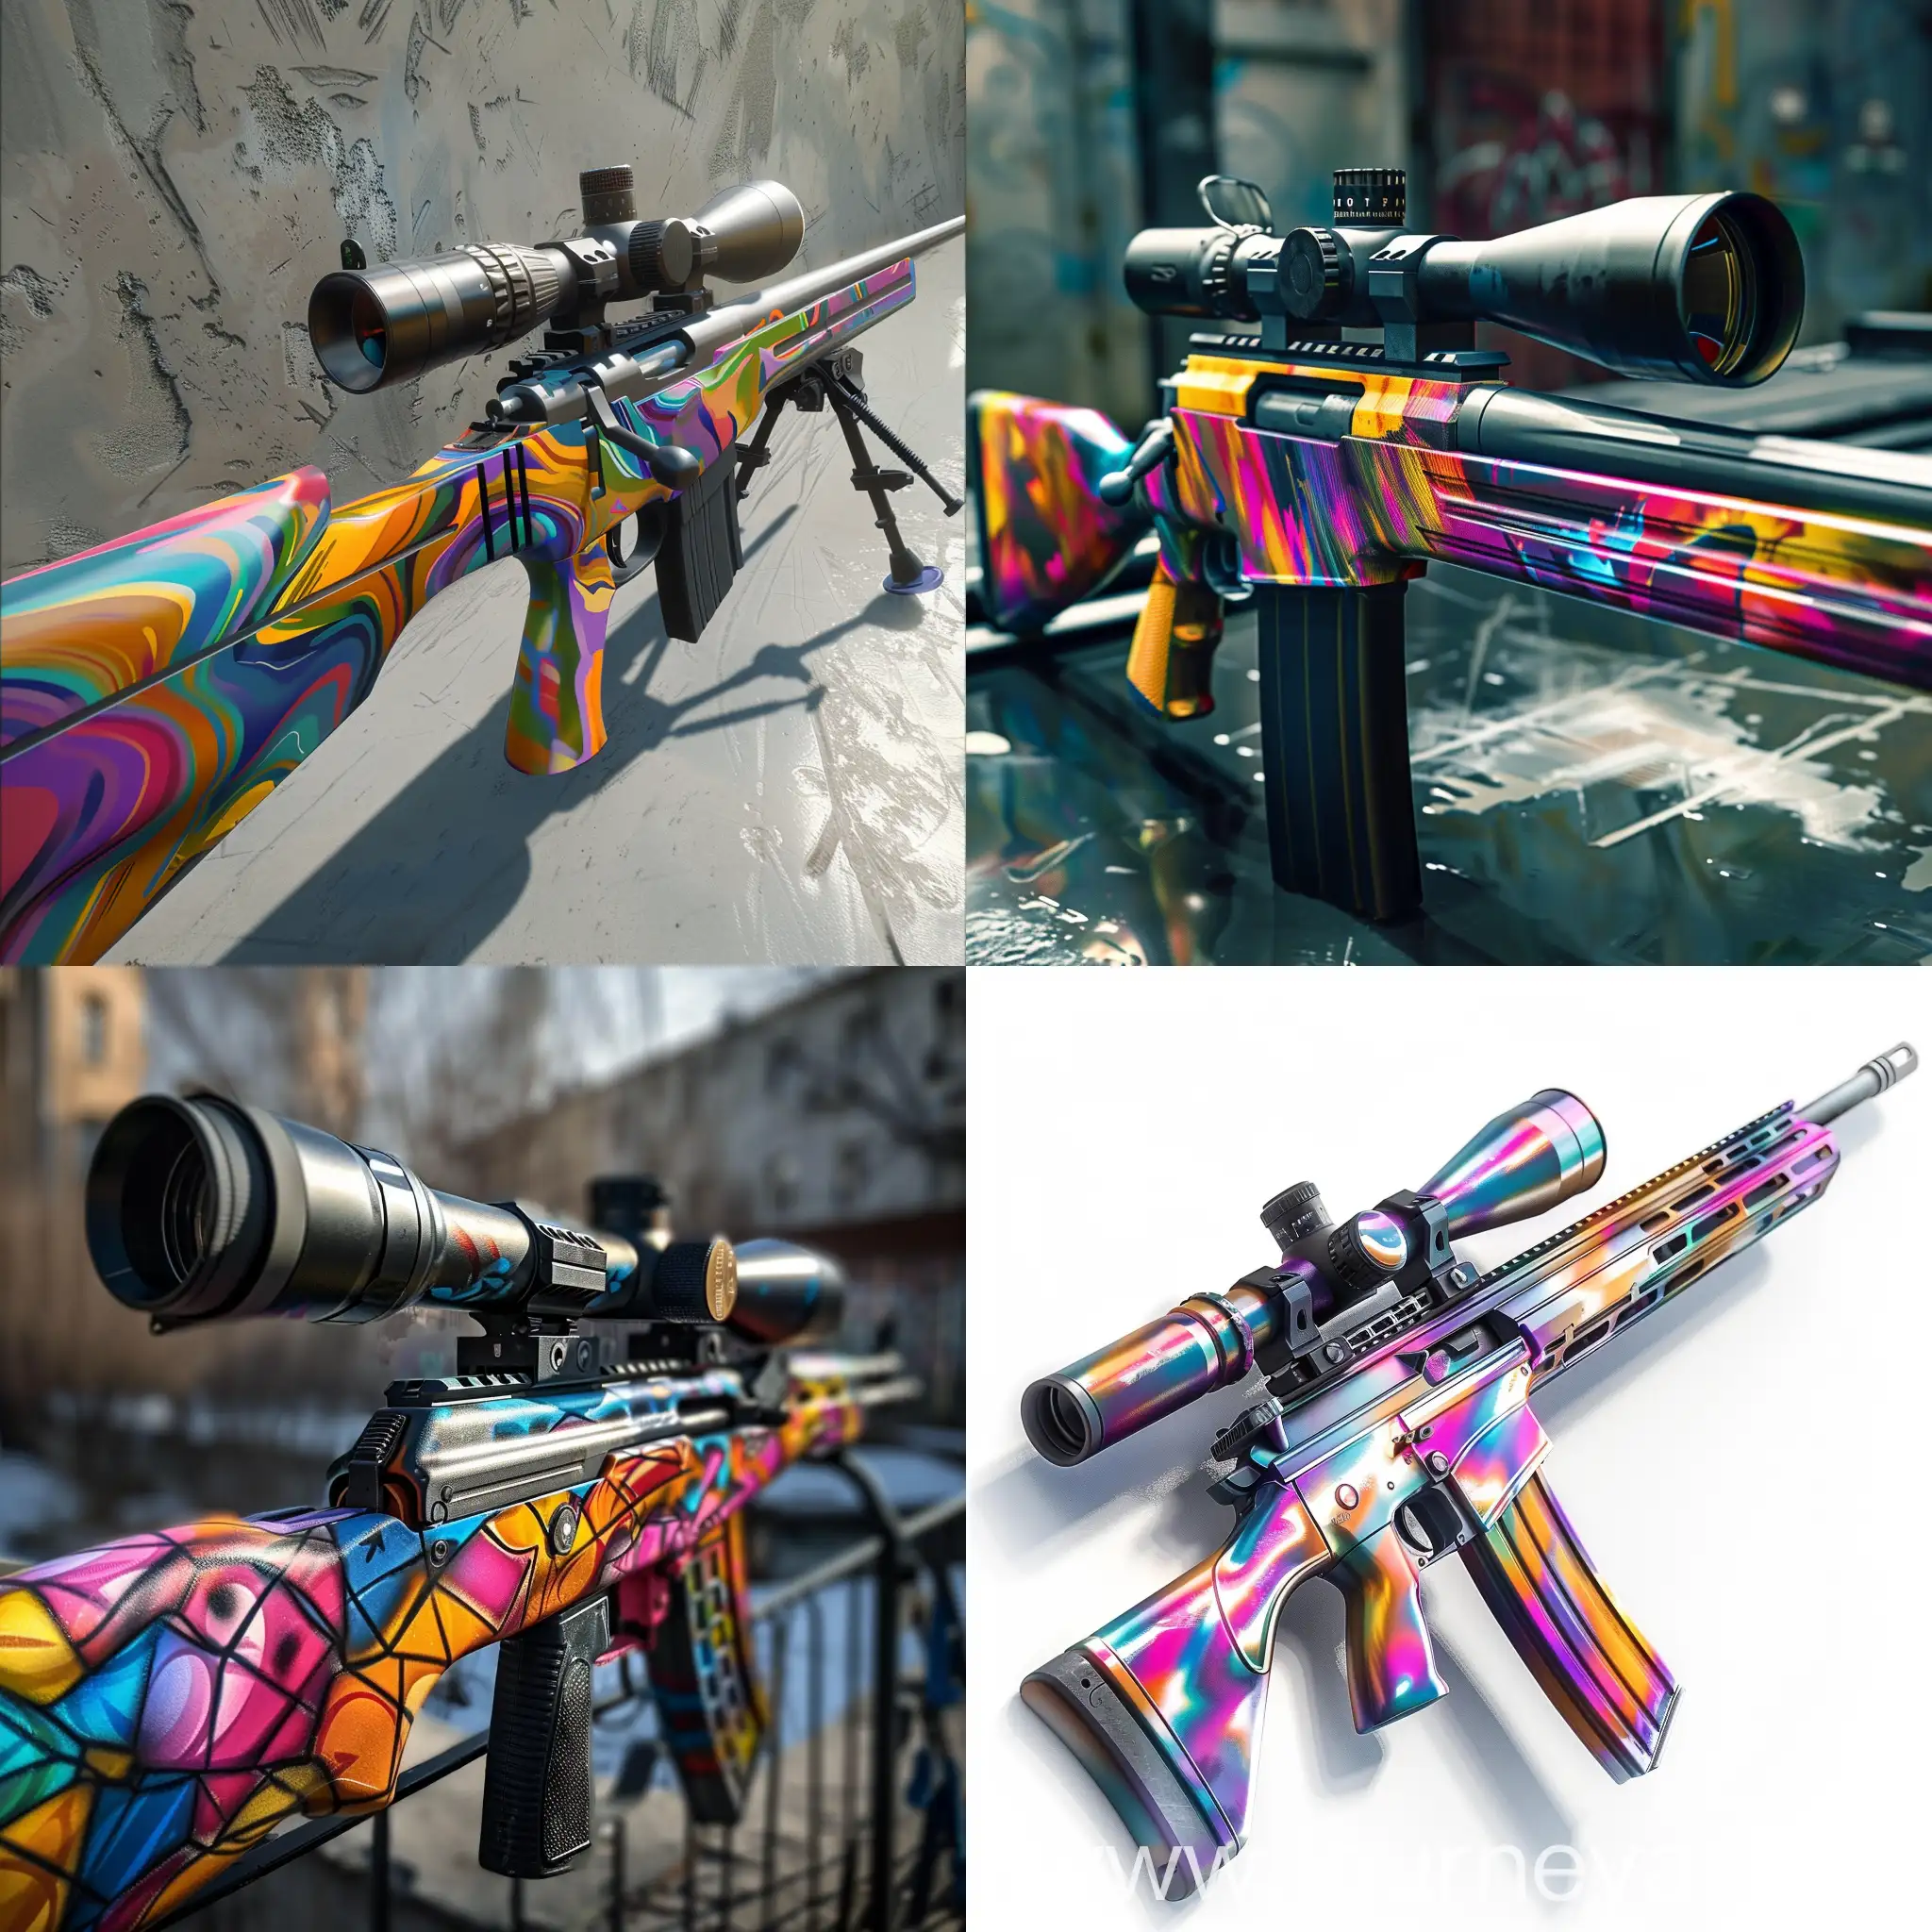 Vibrant-Skin-Pattern-for-Rifle-Abstract-and-Eyecatching-Design